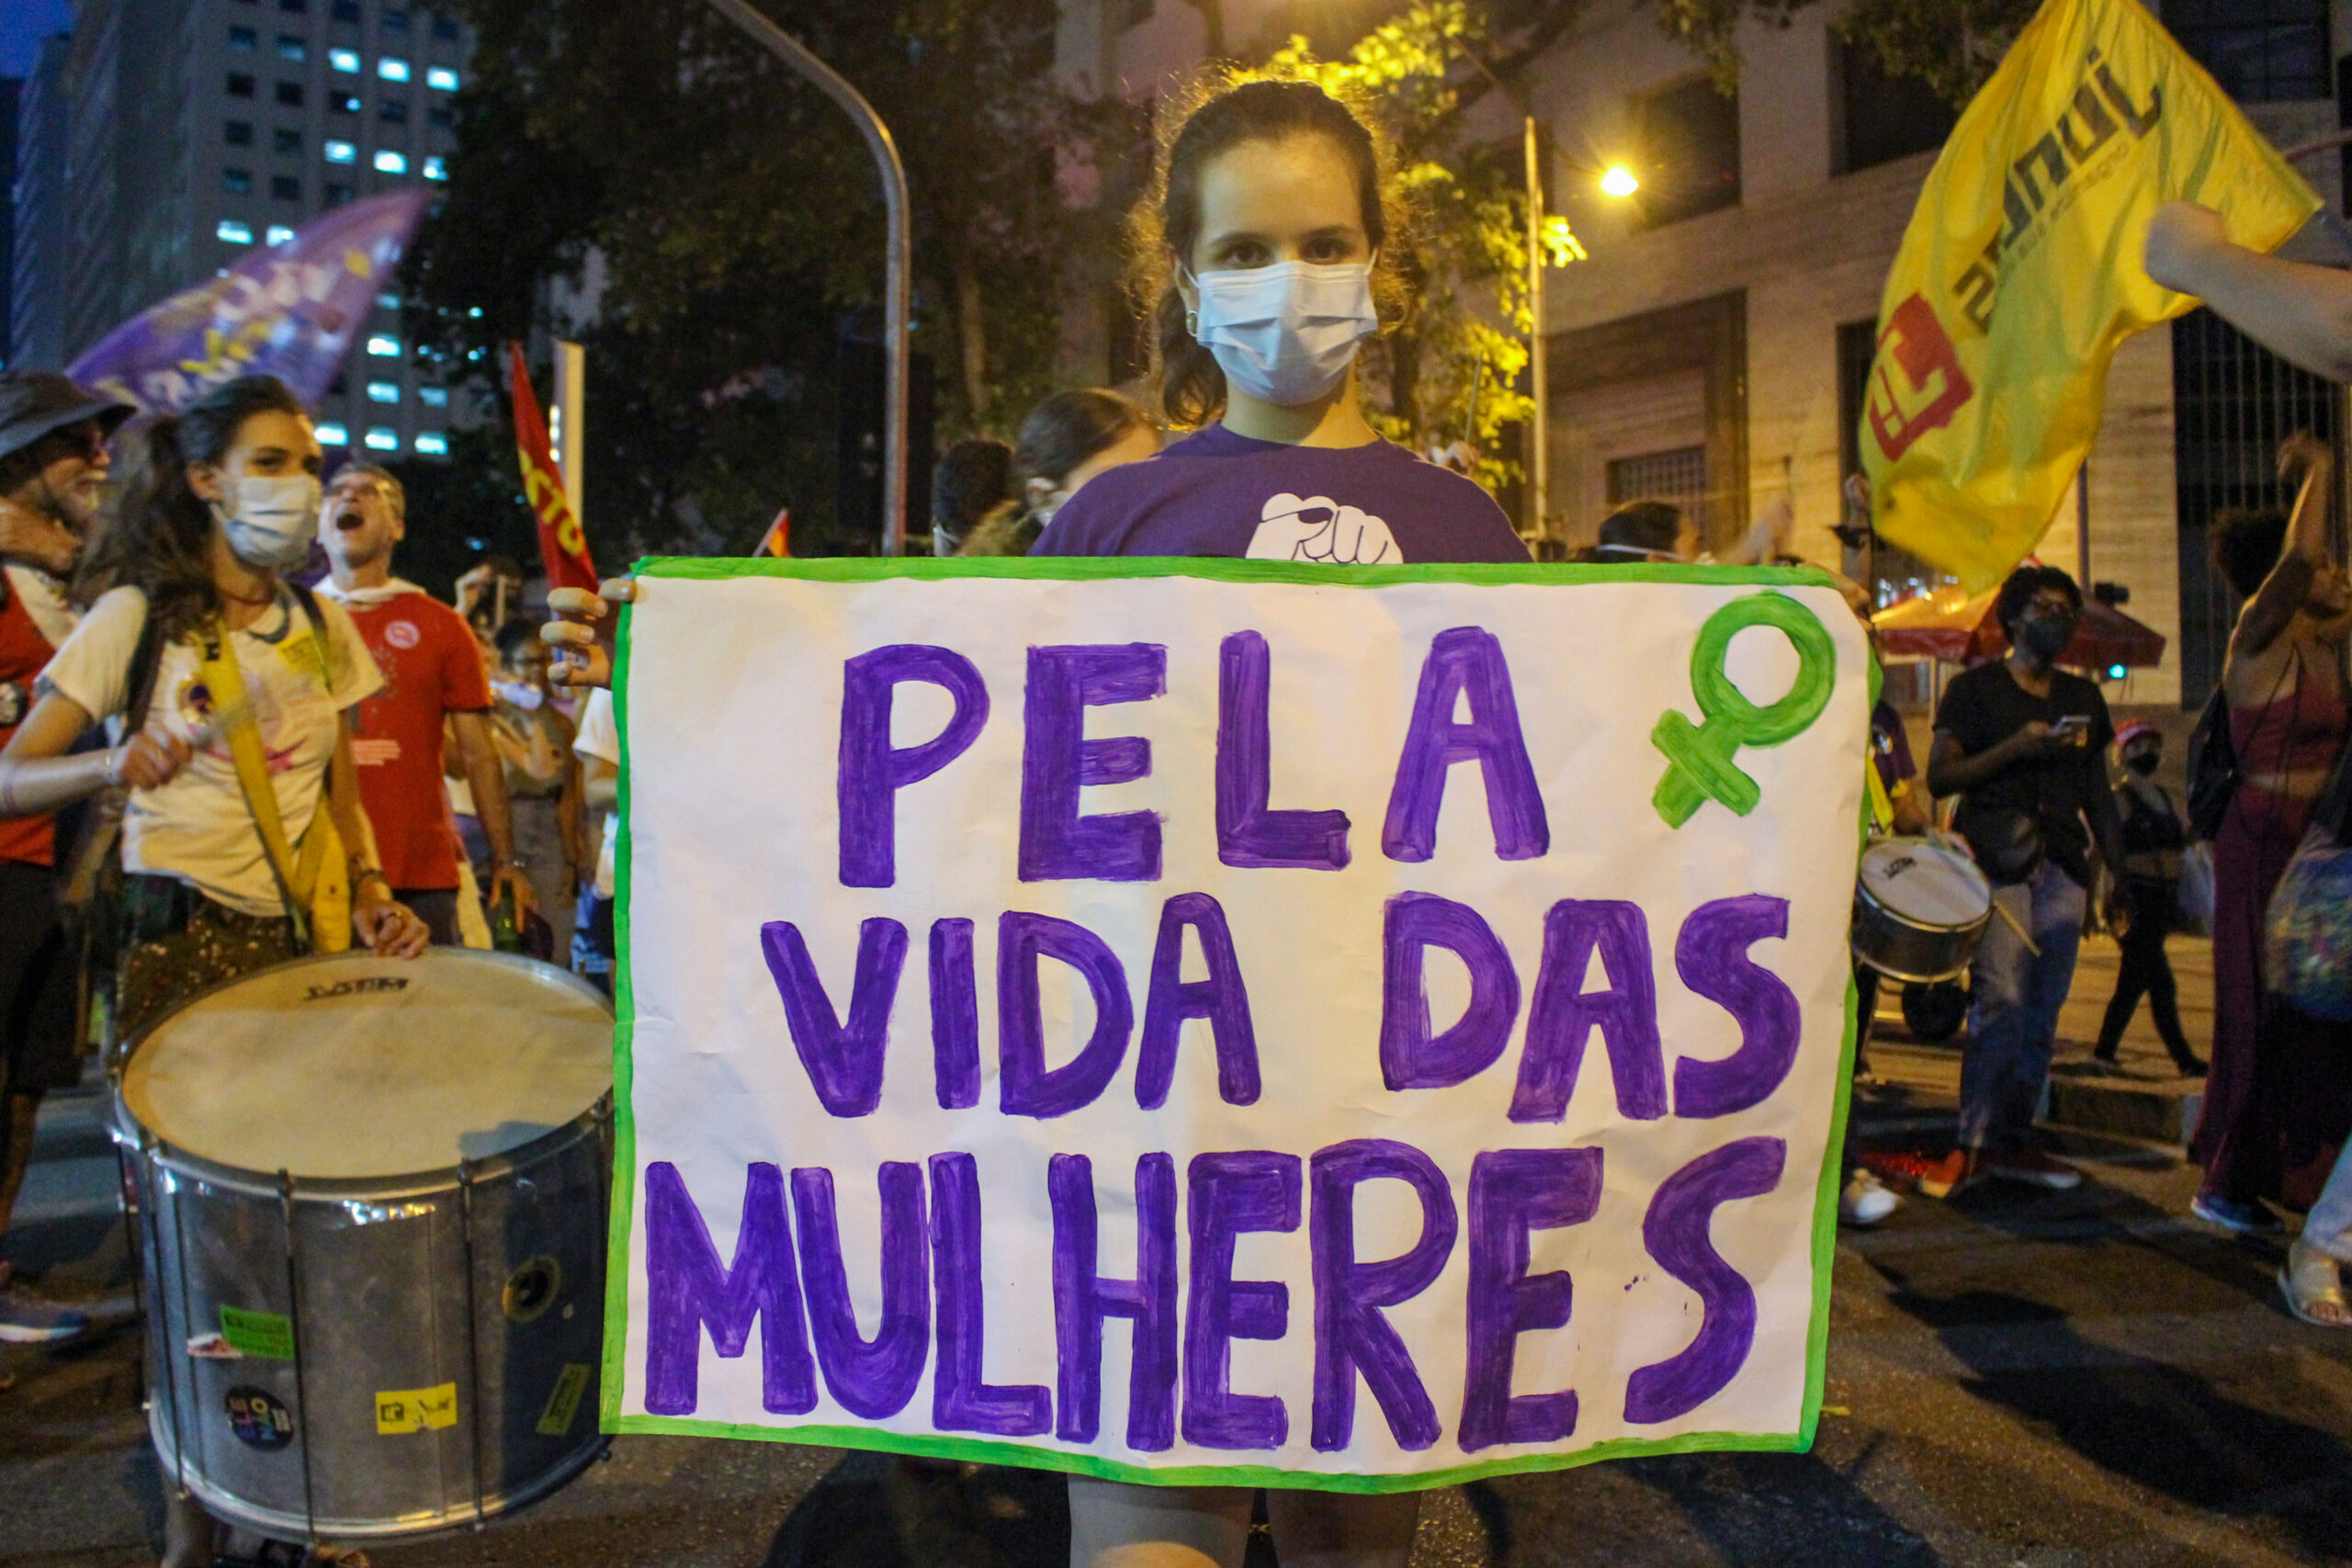 Violence against women was one of the themes raised by activists on signs and speeches. Photo: Jaqueline Suarez